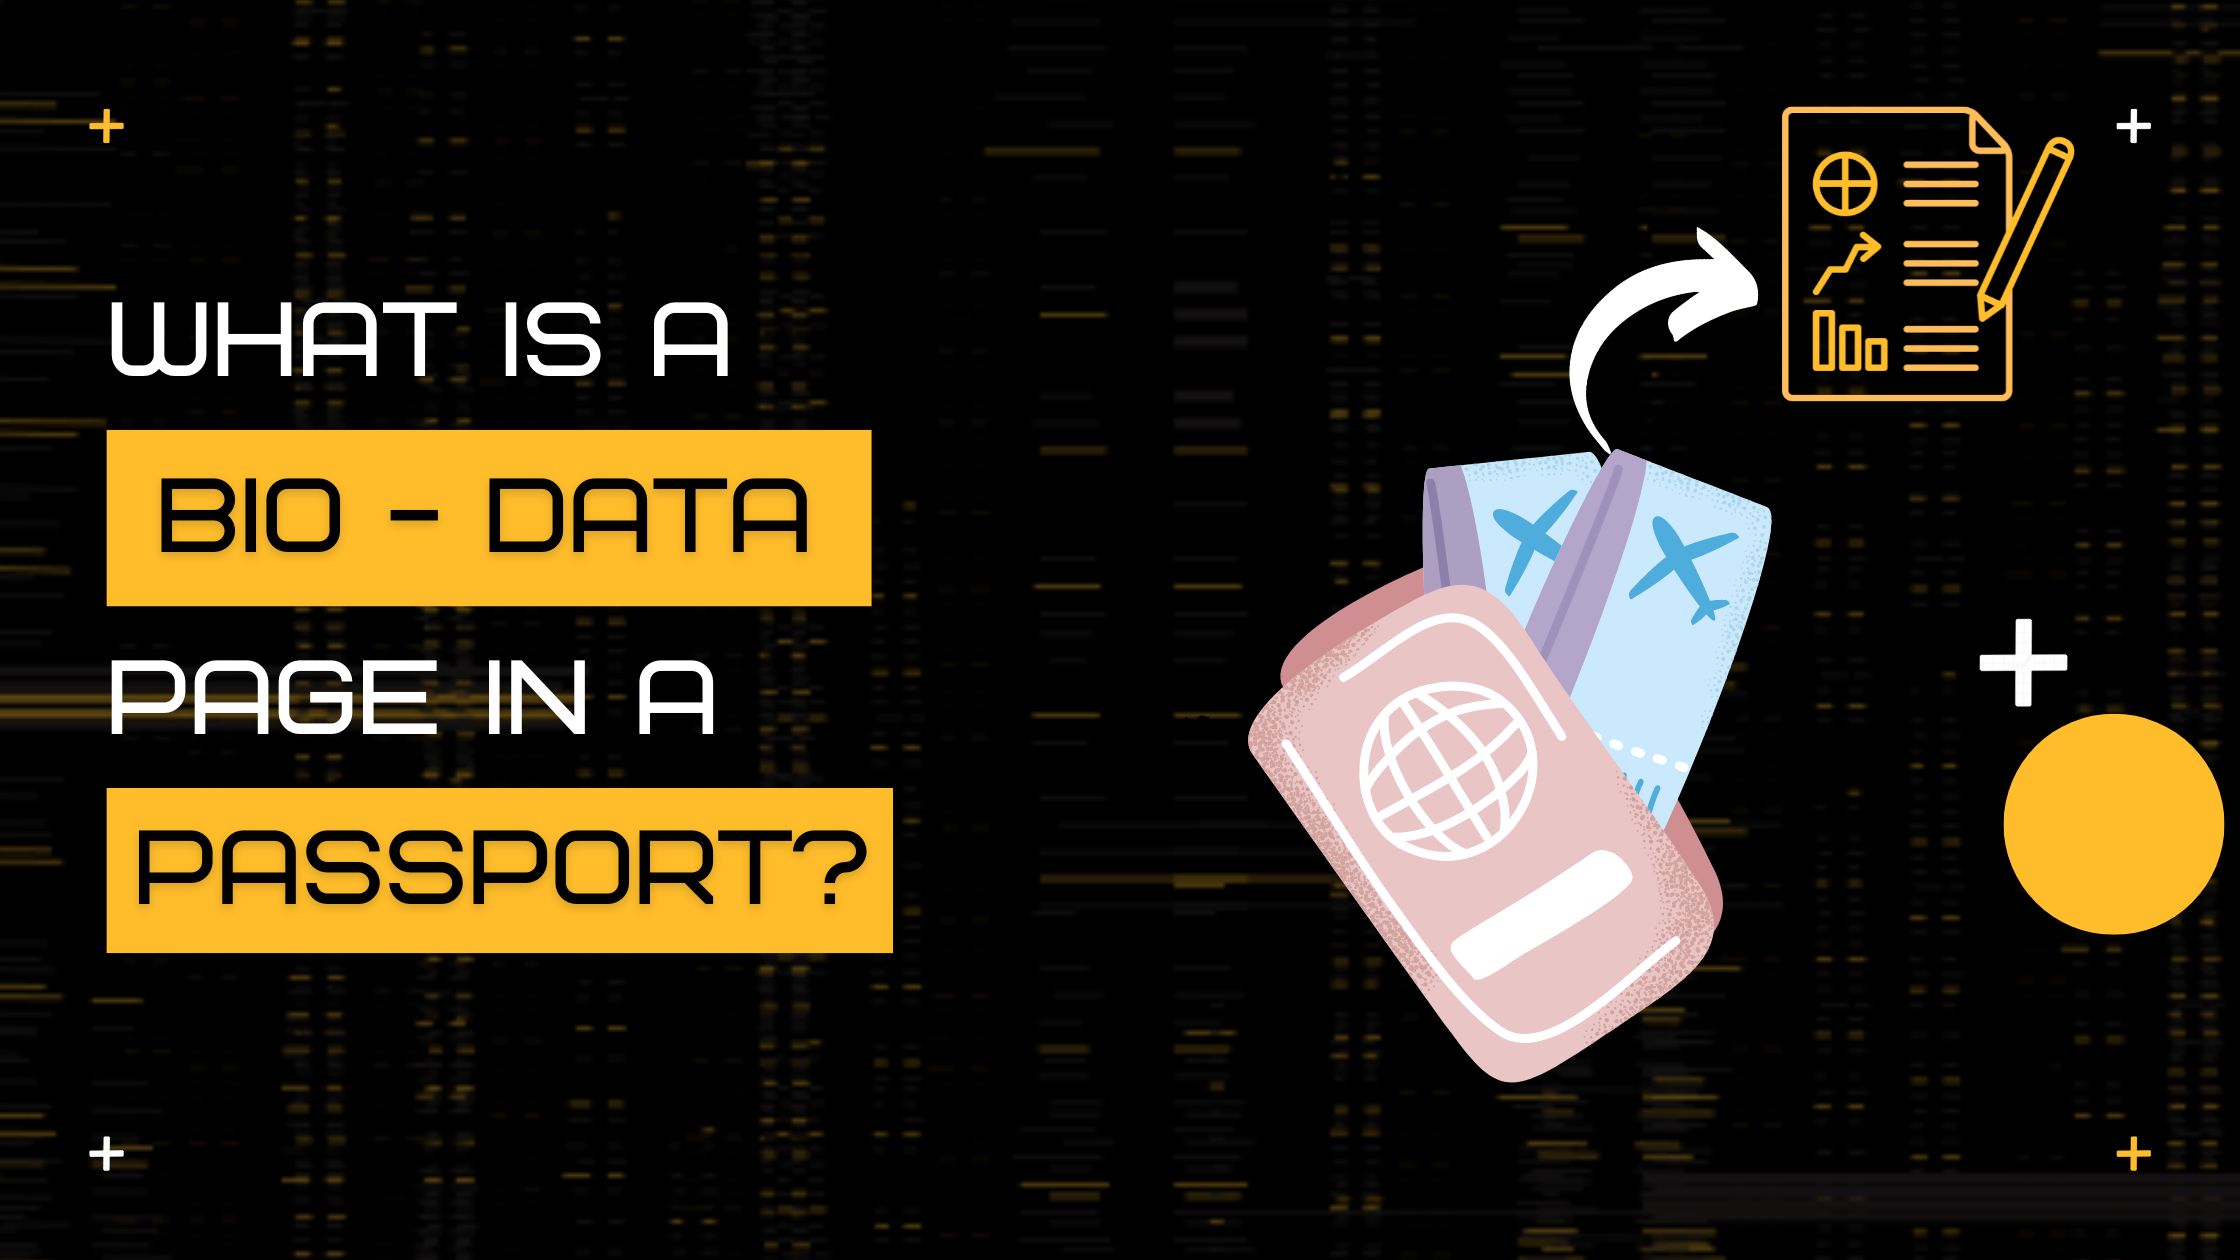 What Is A Bio-Data Page In A Passport